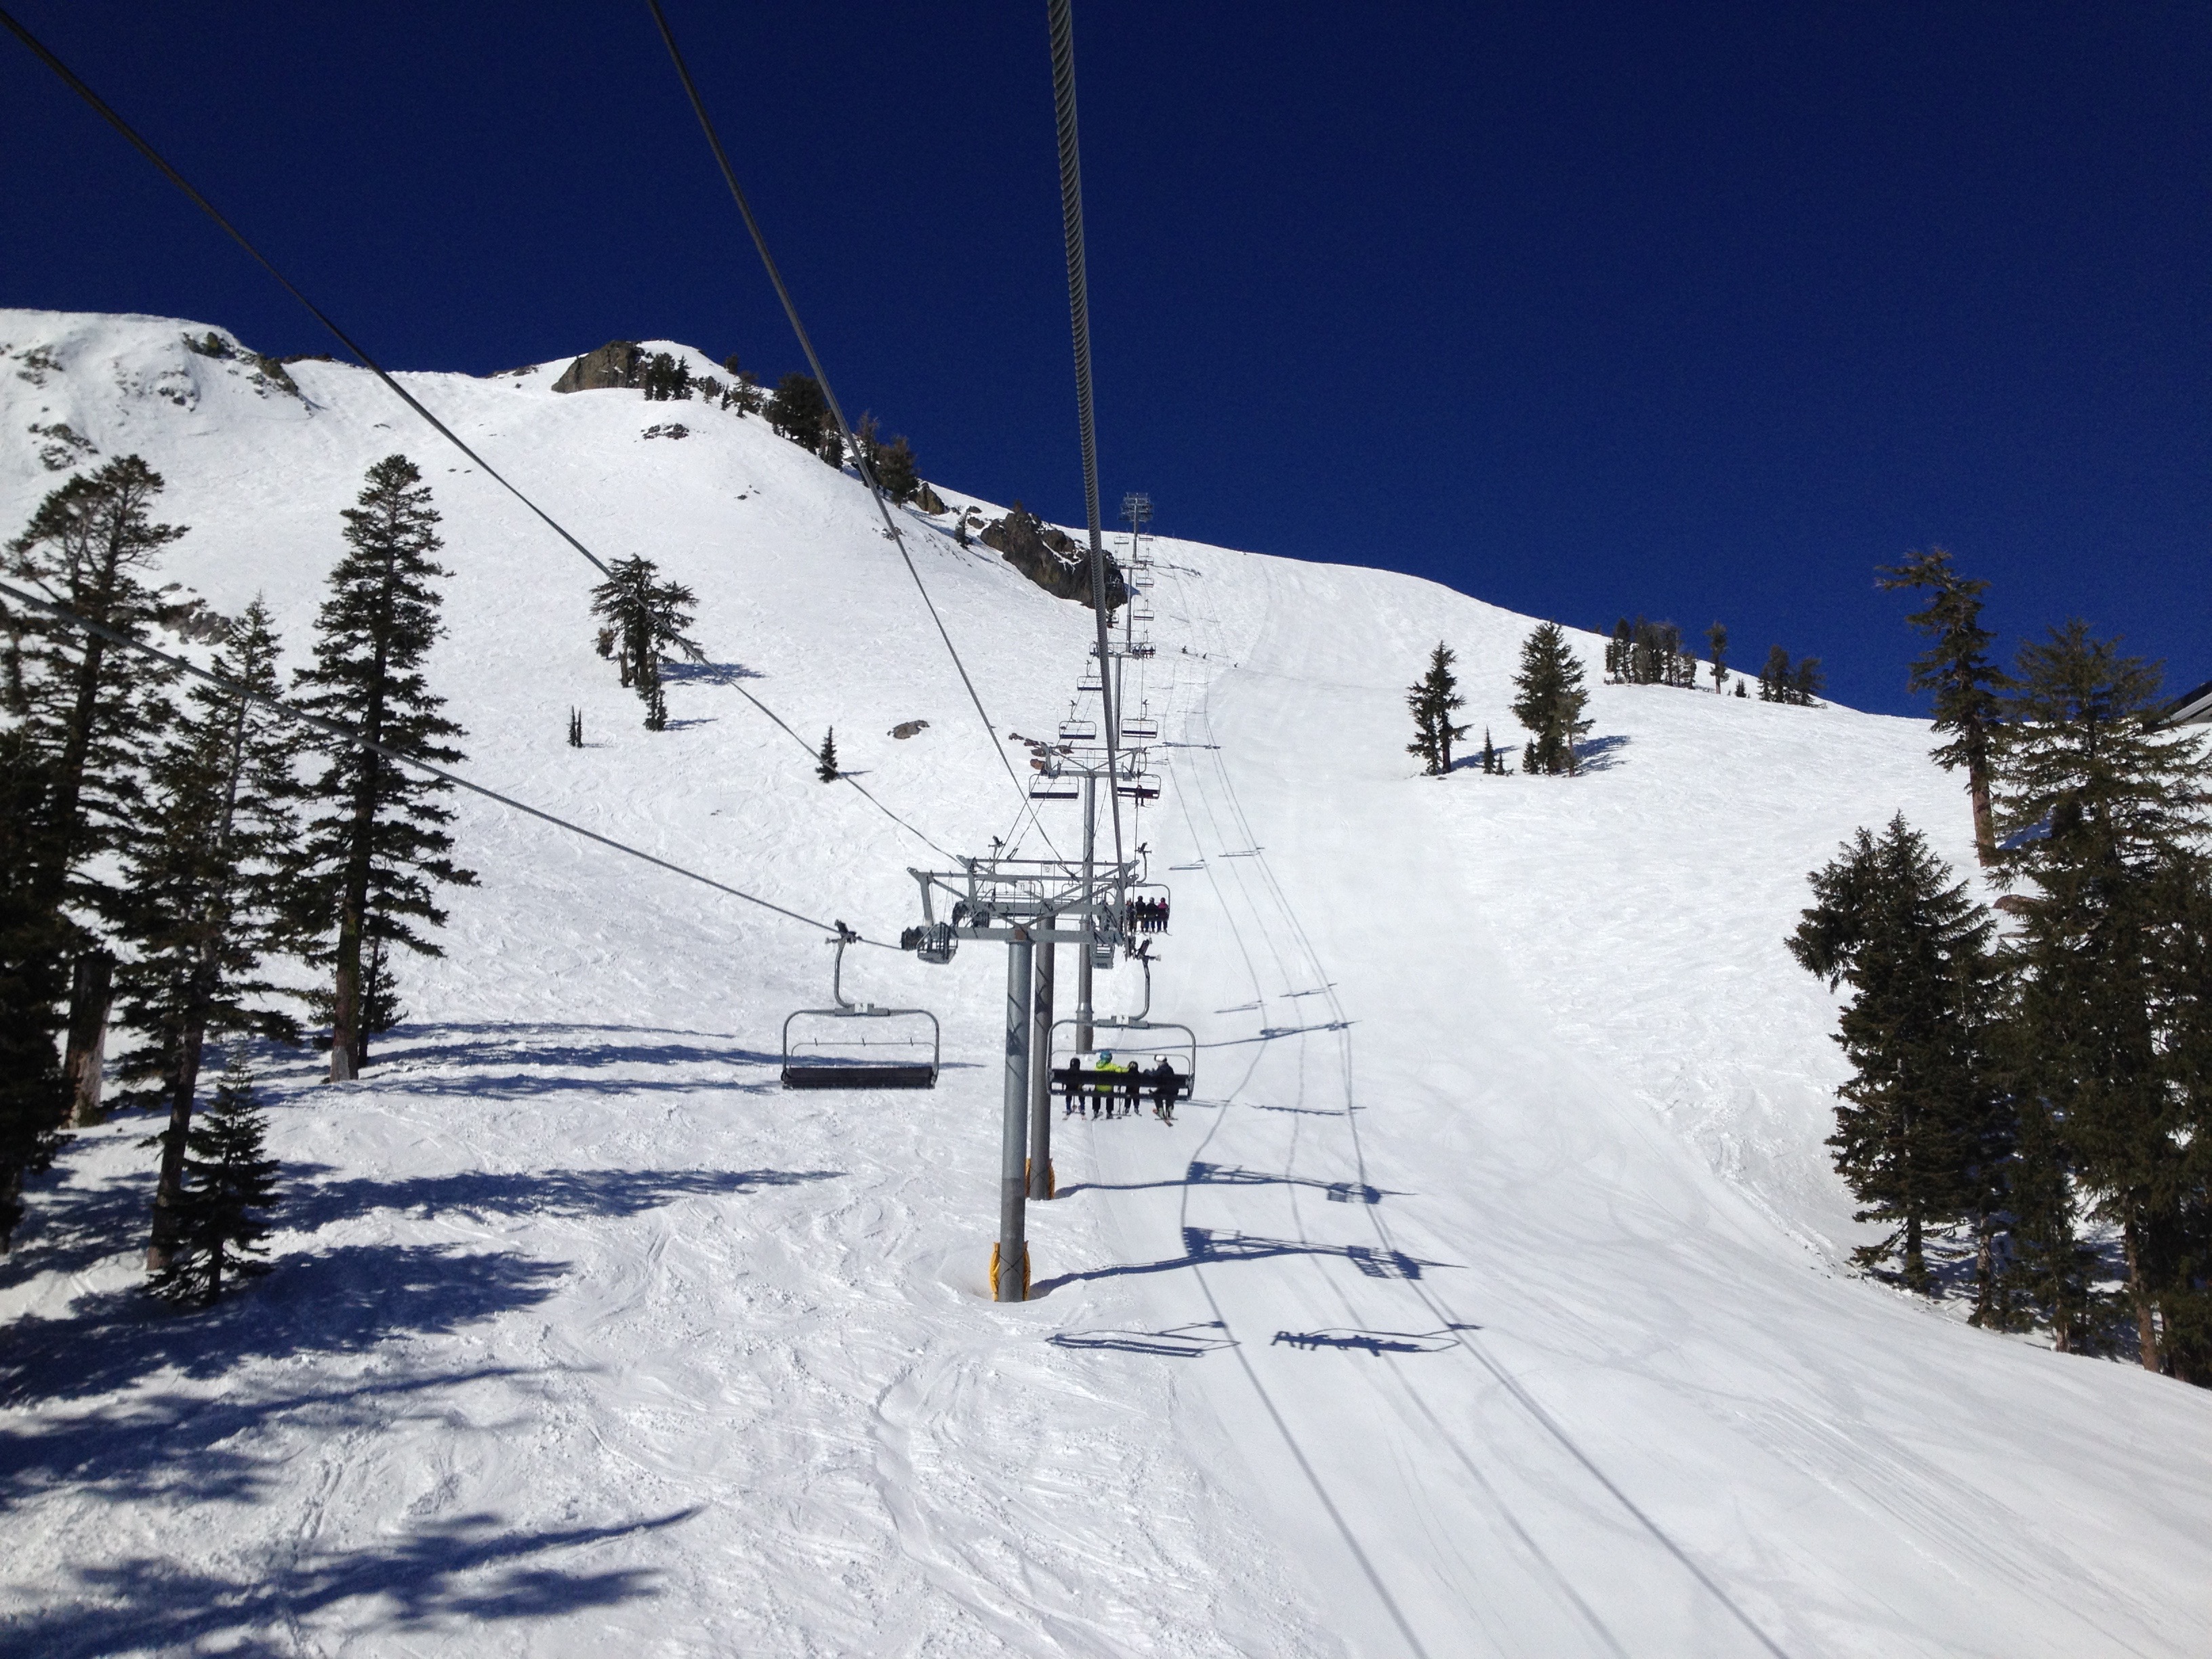 Headwall at Squaw today. photo: snowbrains